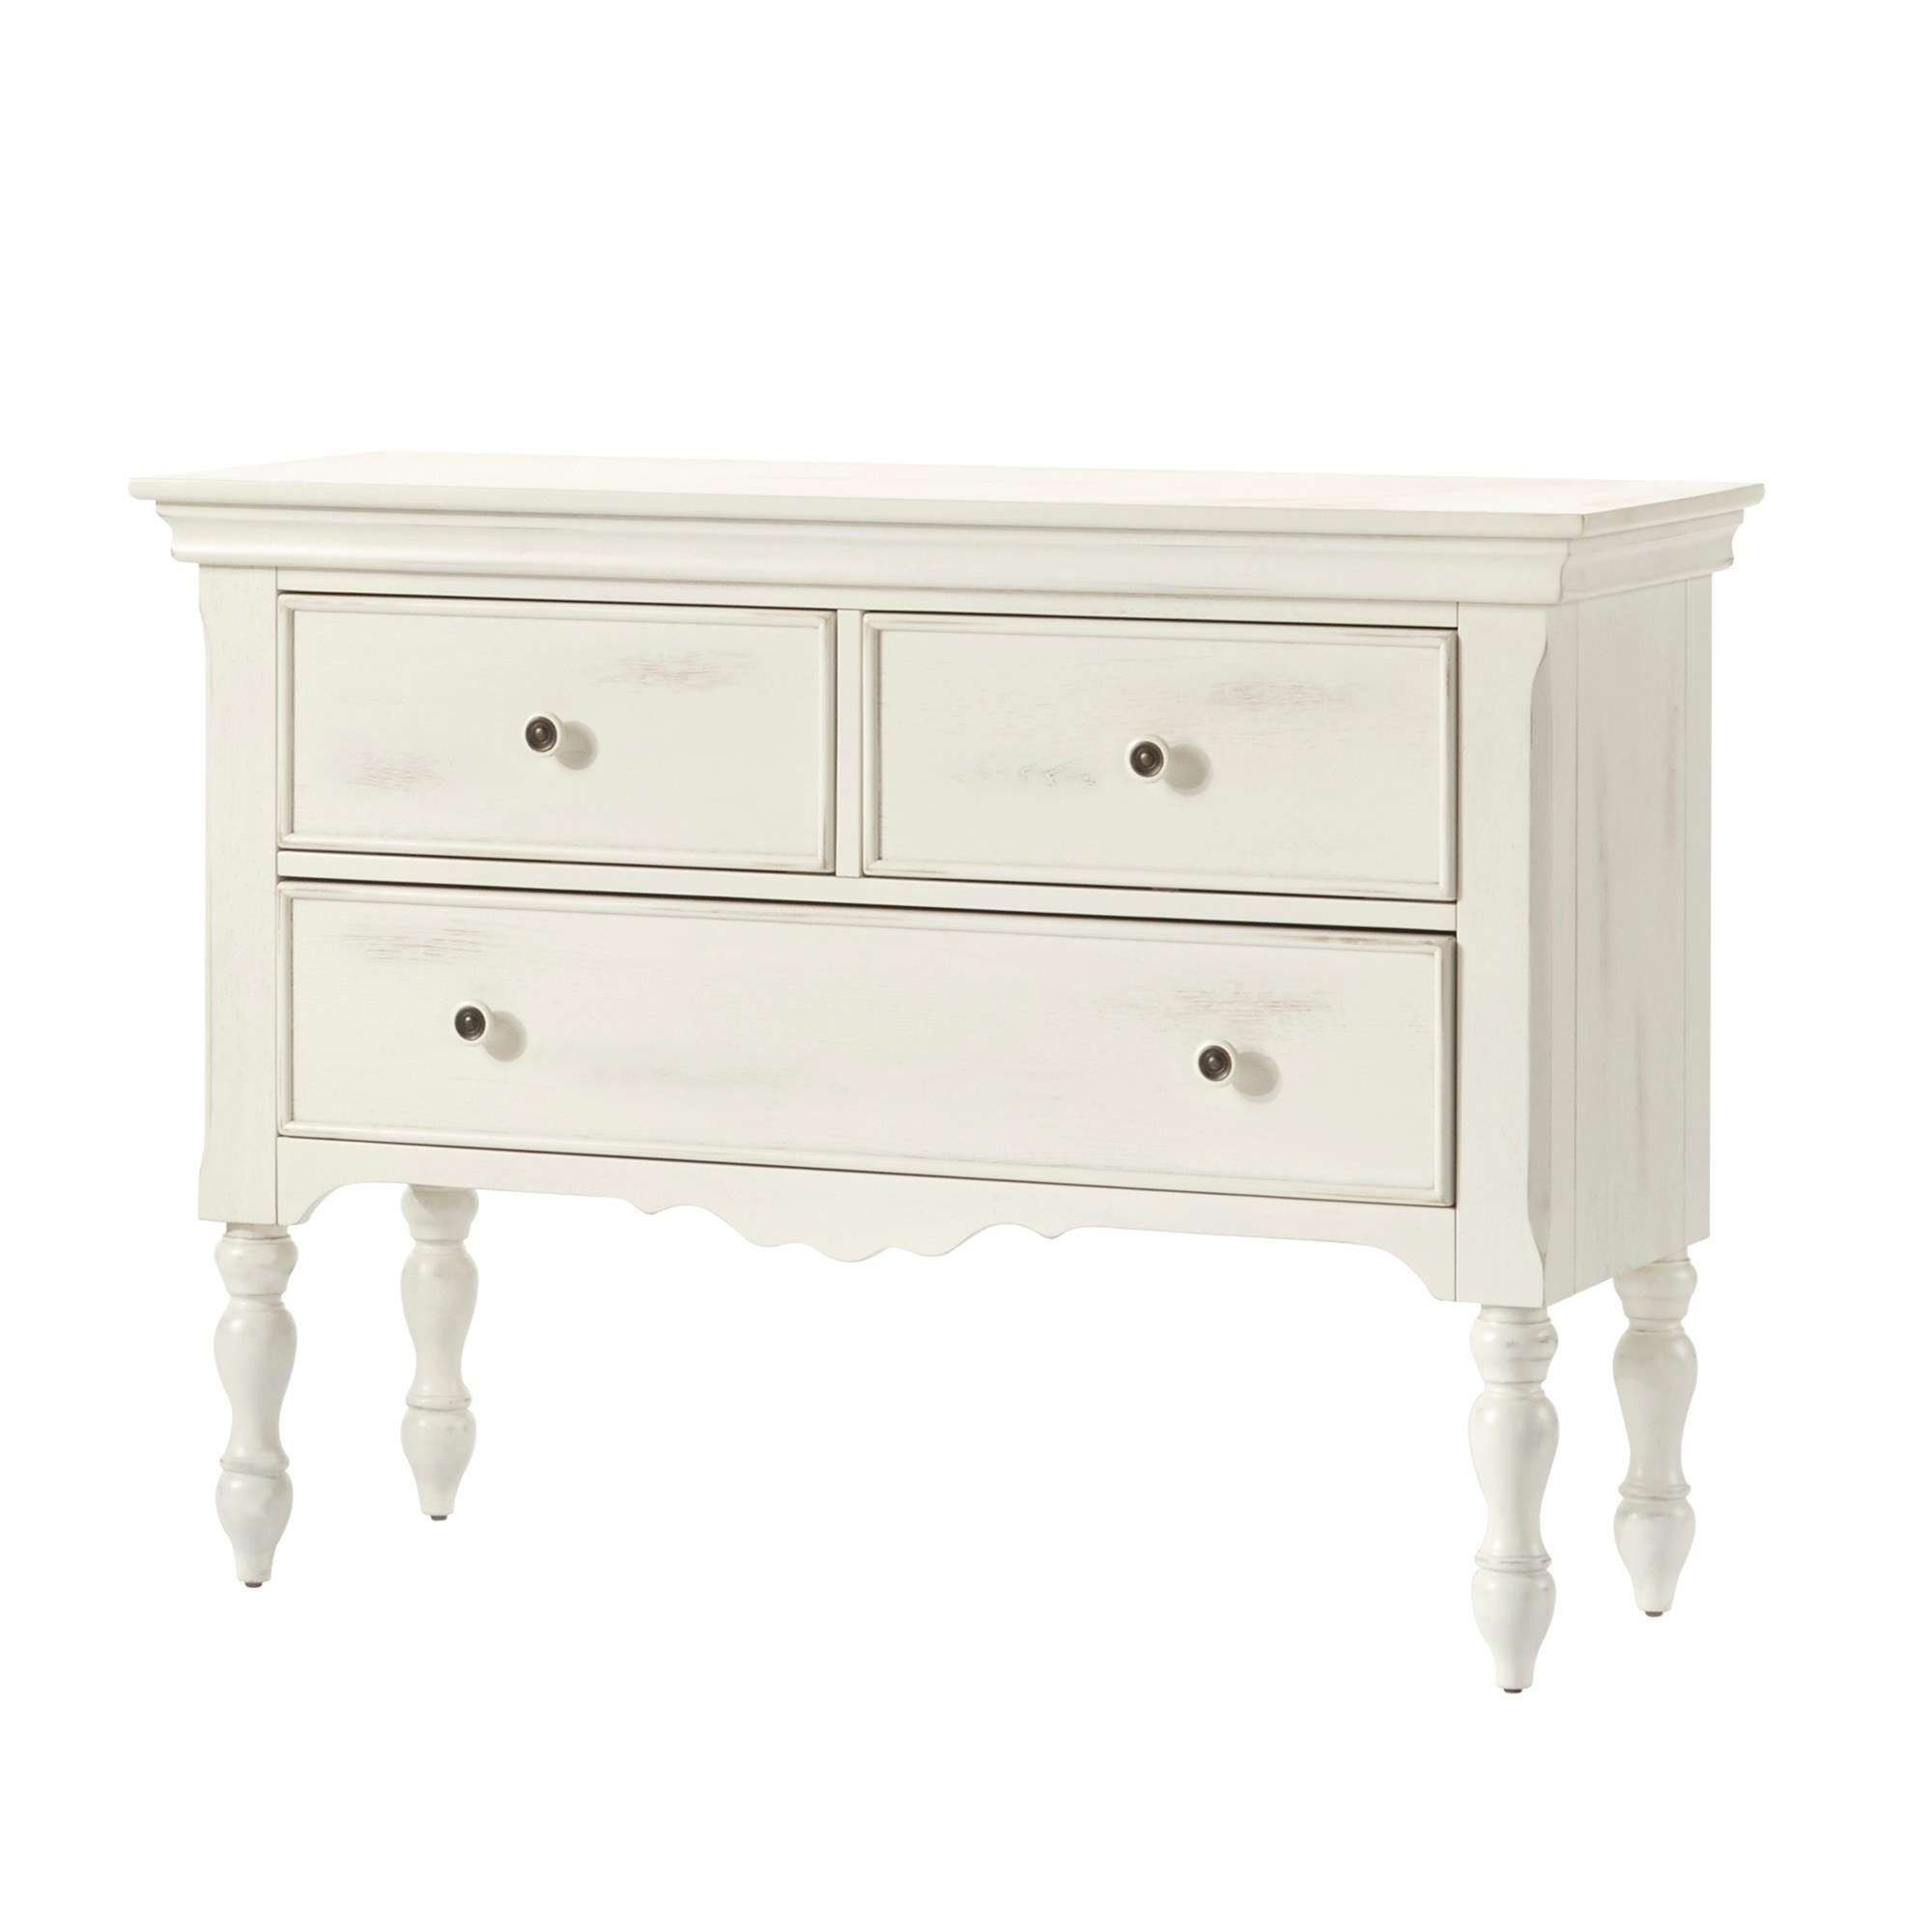 Mckay Country Antique White Buffet Storage Serverinspire Q With Regard To Antique White Sideboards (View 5 of 20)